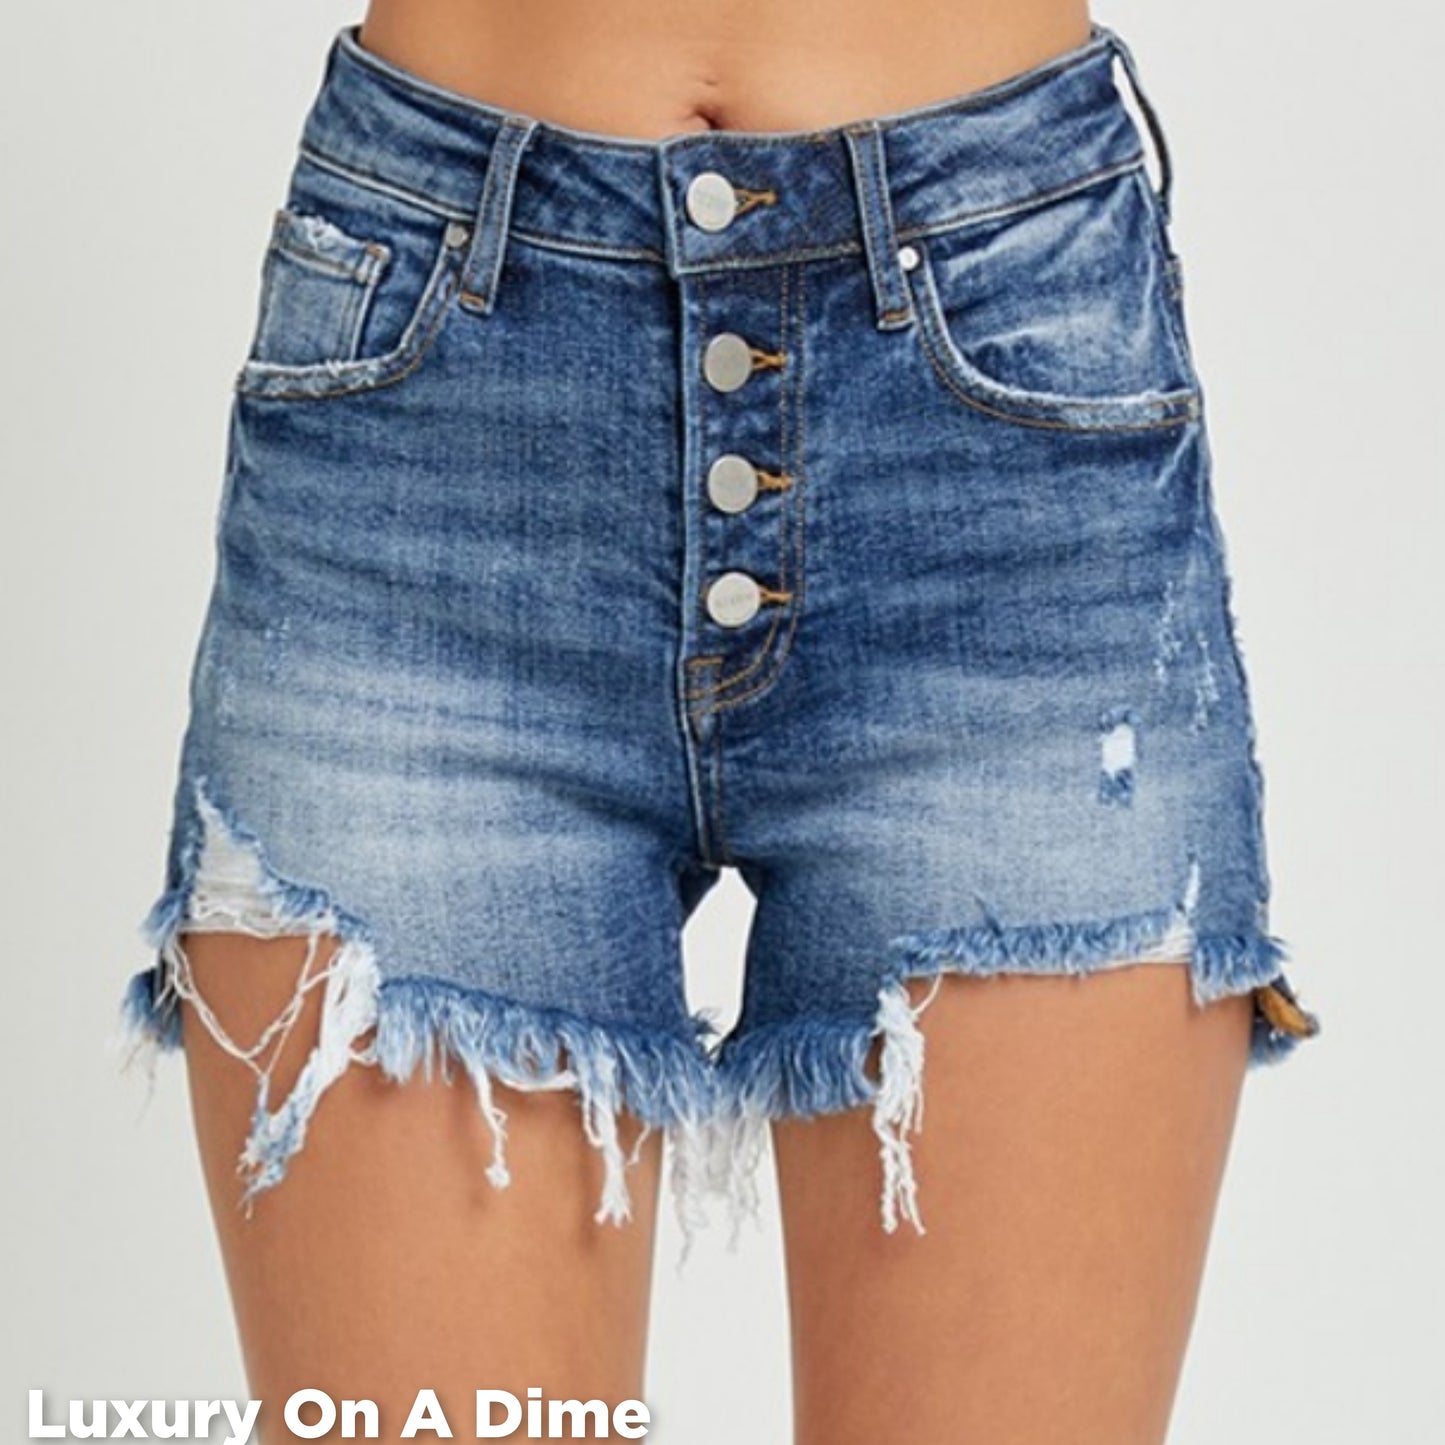 RISEN Button Fly Distressed Denim Mid-Rise Frayed Cut-Off Blue Jean Shorts